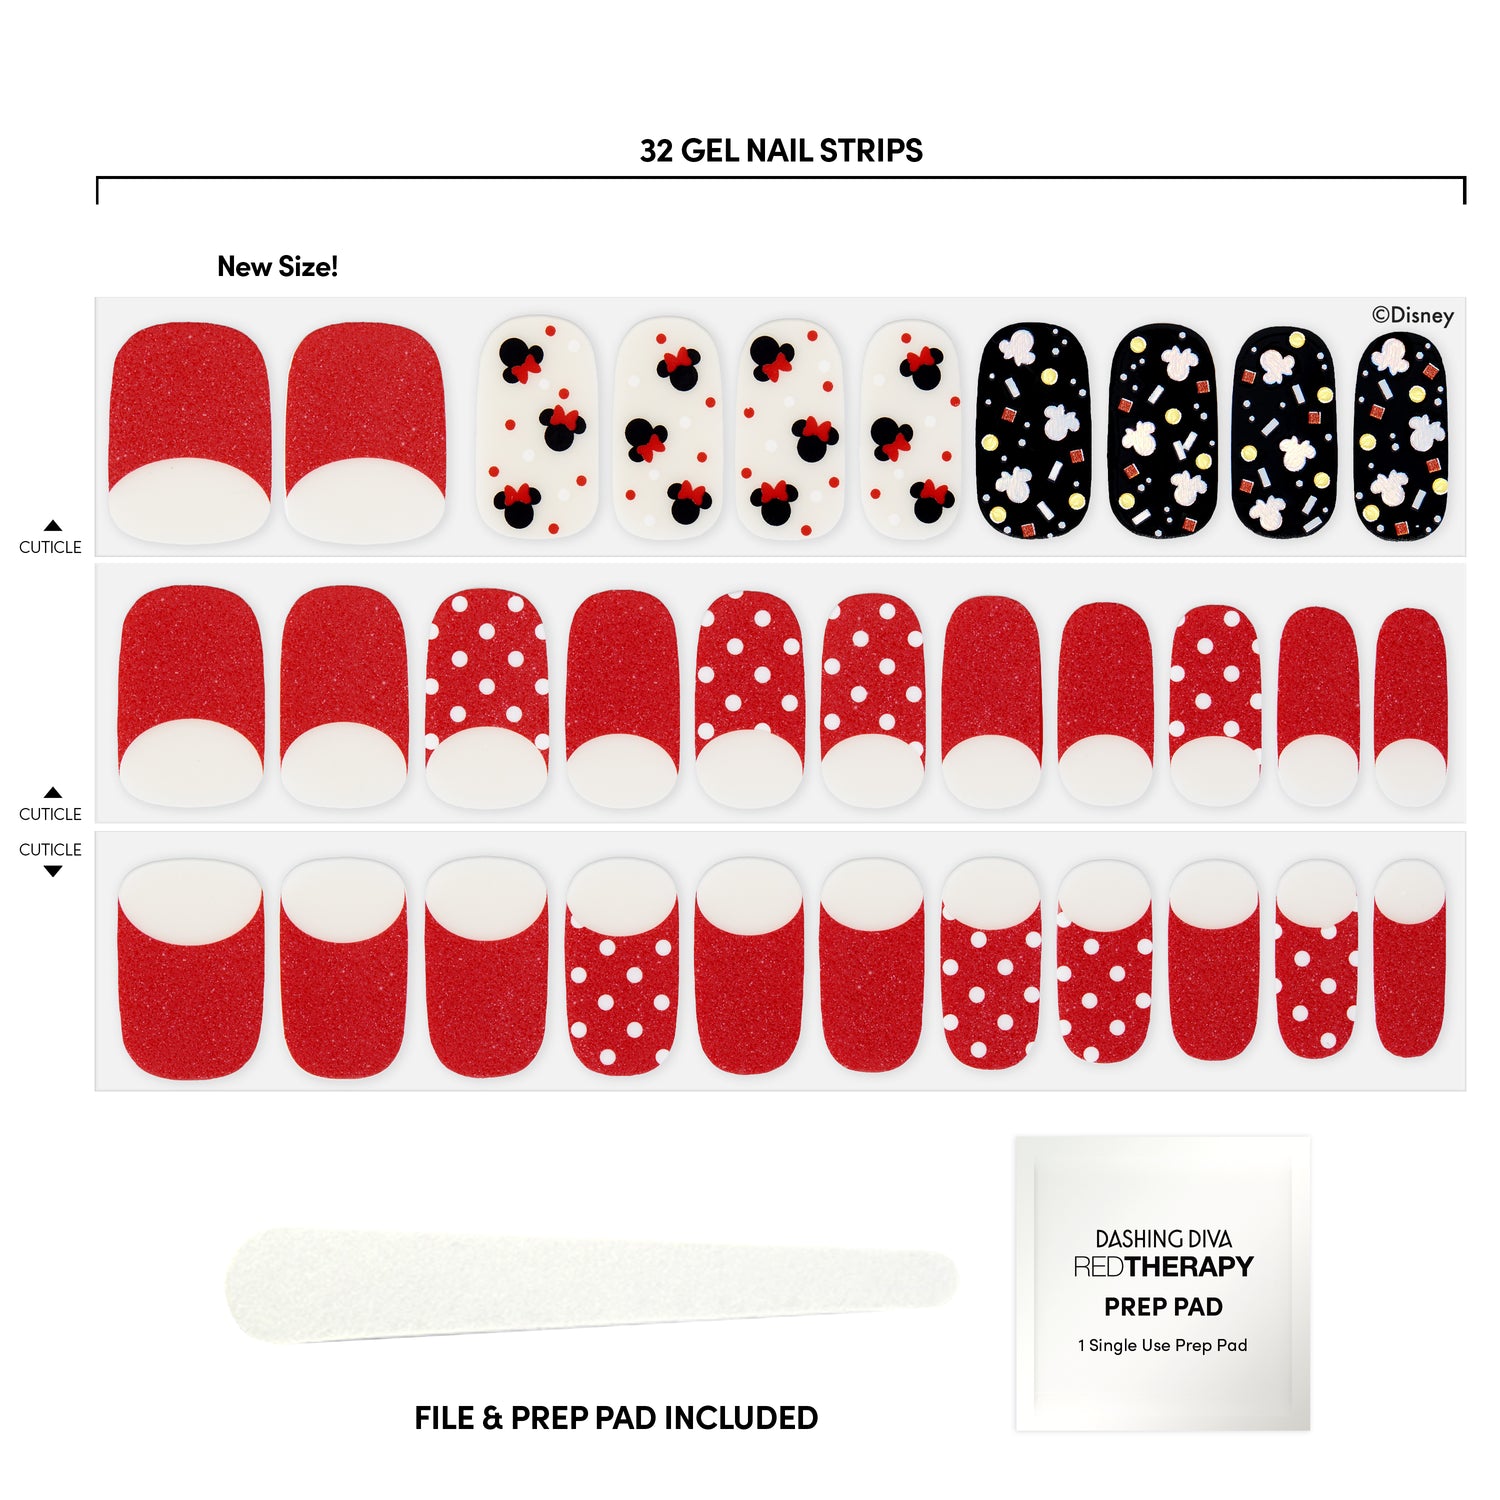 Red French gel nail strips featuring red and white polka dots, pink and black Mickey, and Minnie ears included nail file, and red therapy Prep pad